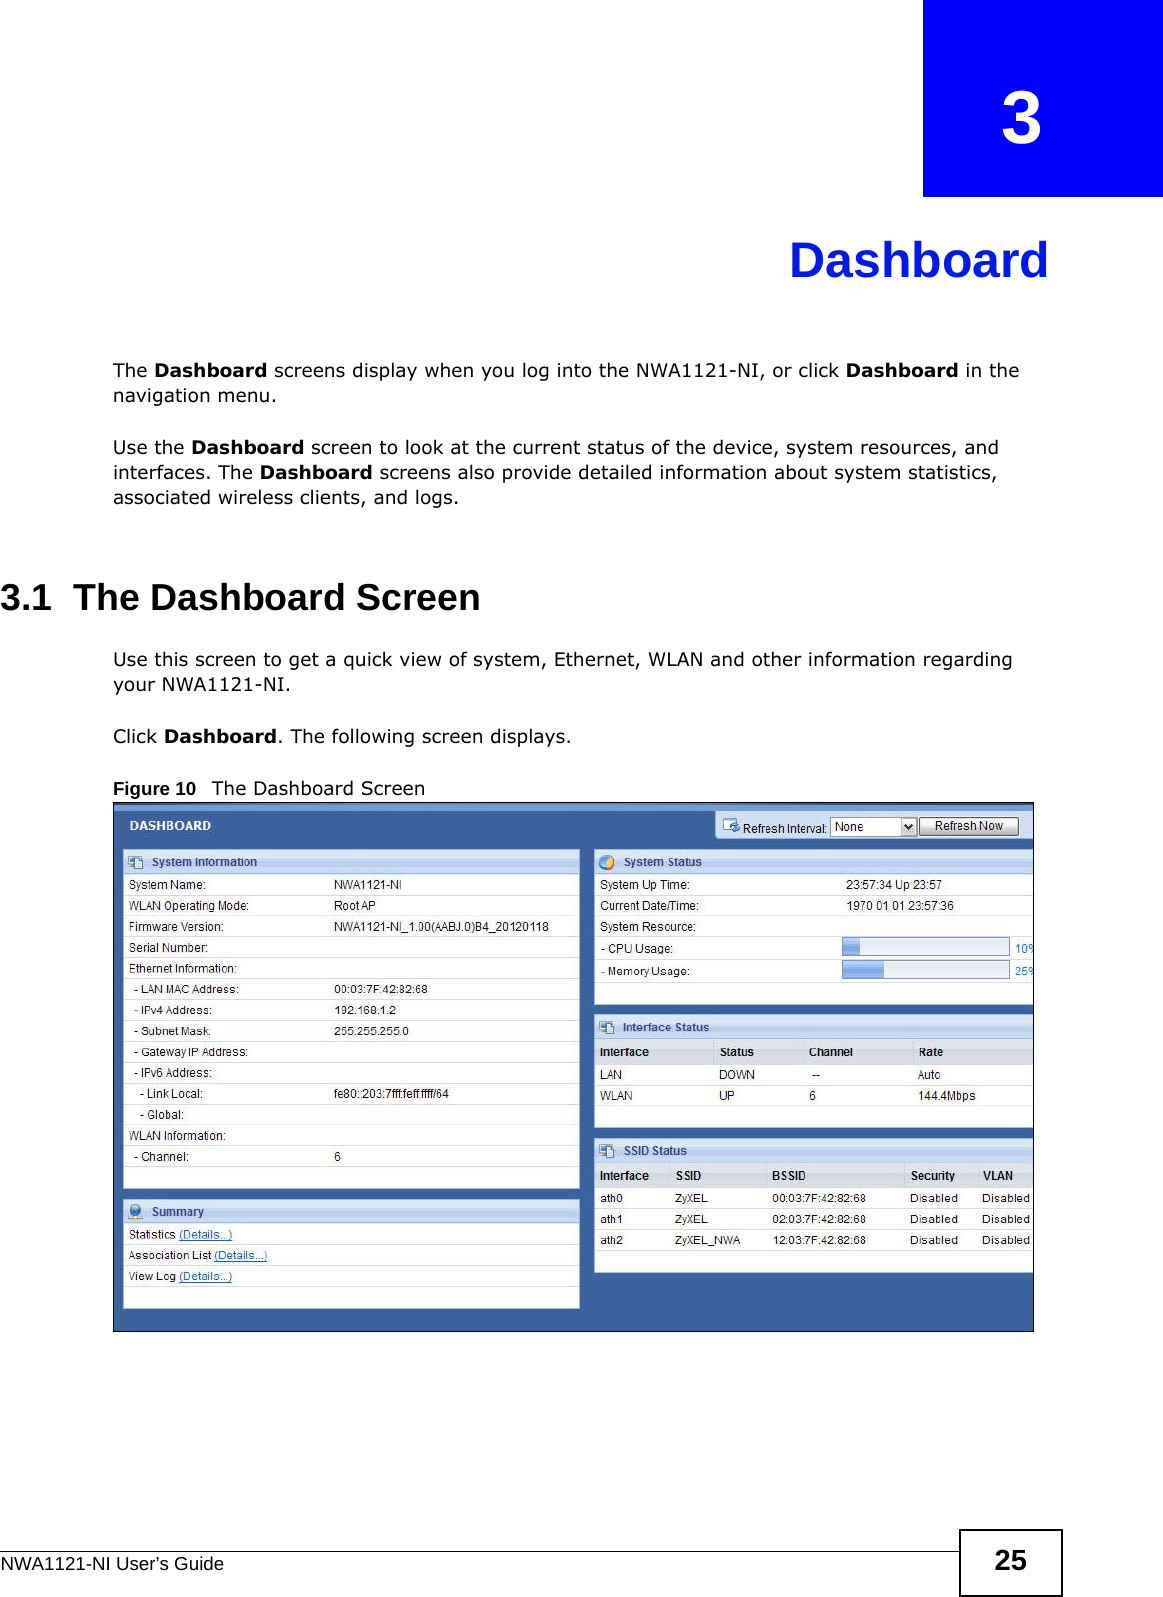 NWA1121-NI User’s Guide 25CHAPTER   3DashboardThe Dashboard screens display when you log into the NWA1121-NI, or click Dashboard in the navigation menu.Use the Dashboard screen to look at the current status of the device, system resources, and interfaces. The Dashboard screens also provide detailed information about system statistics, associated wireless clients, and logs.3.1  The Dashboard ScreenUse this screen to get a quick view of system, Ethernet, WLAN and other information regarding your NWA1121-NI. Click Dashboard. The following screen displays.Figure 10   The Dashboard Screen